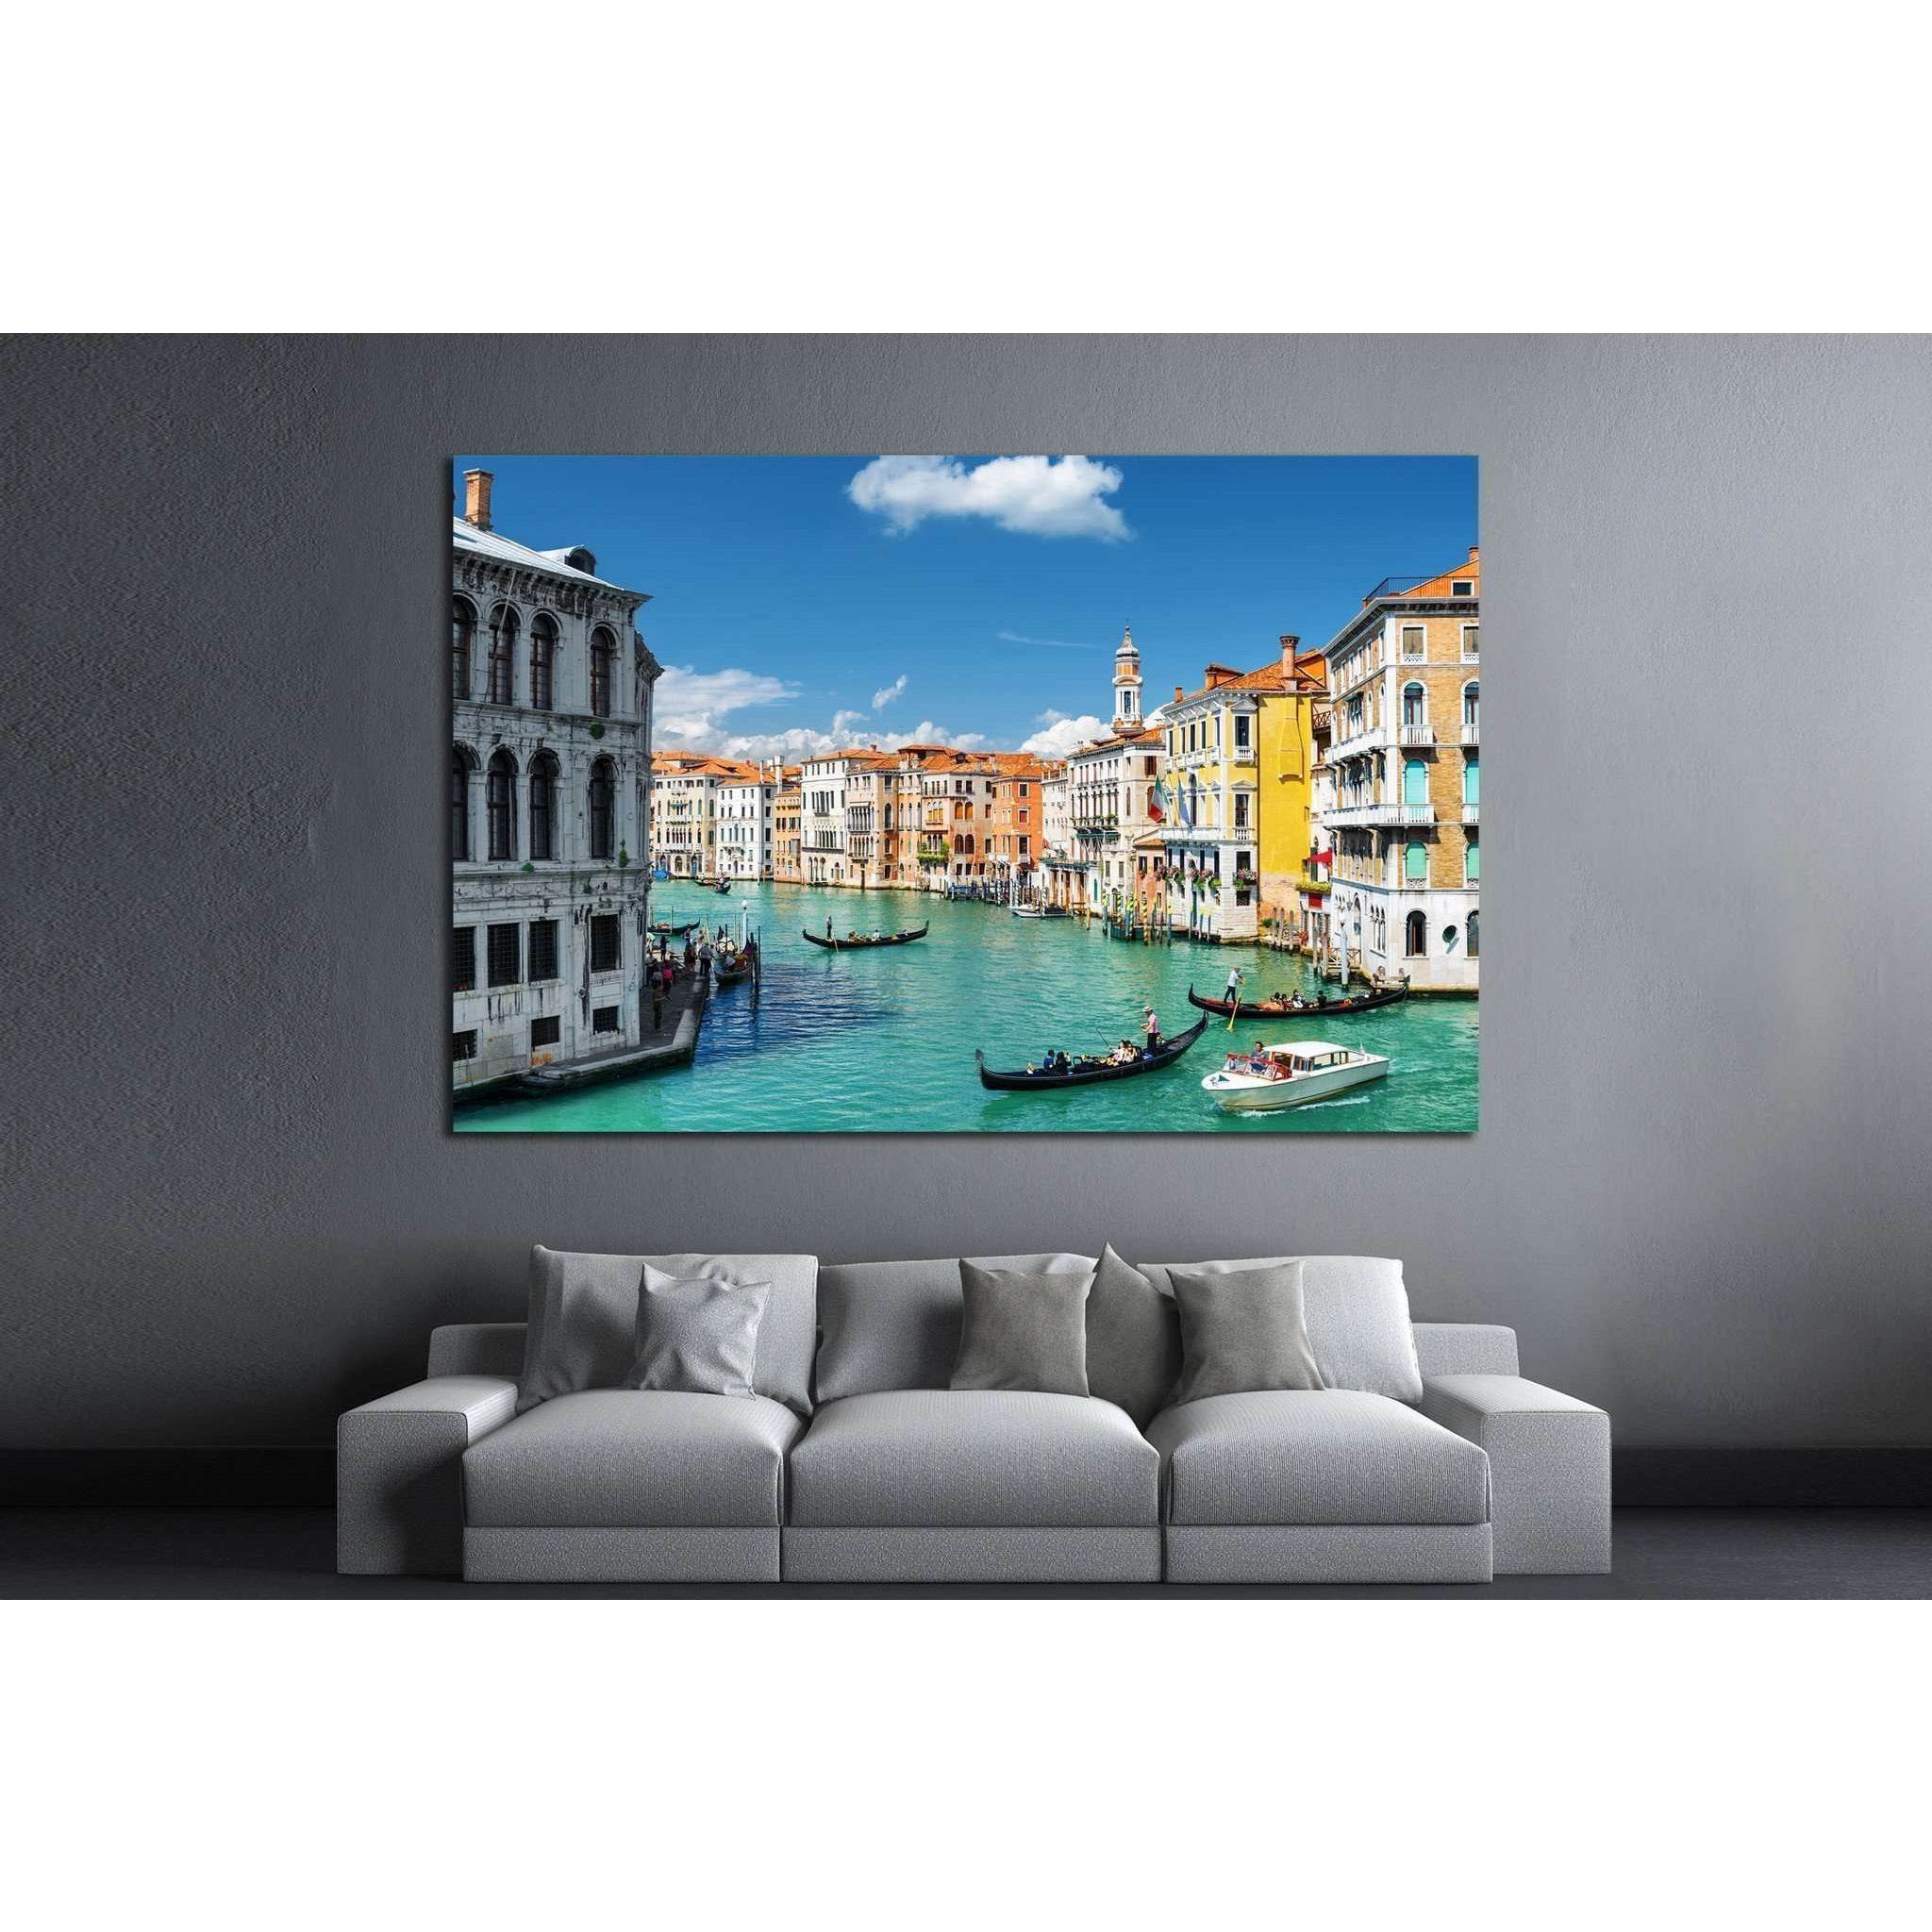 Palazzo dei Camerlenghi and the Grand Canal №1542 Ready to Hang Canvas Print